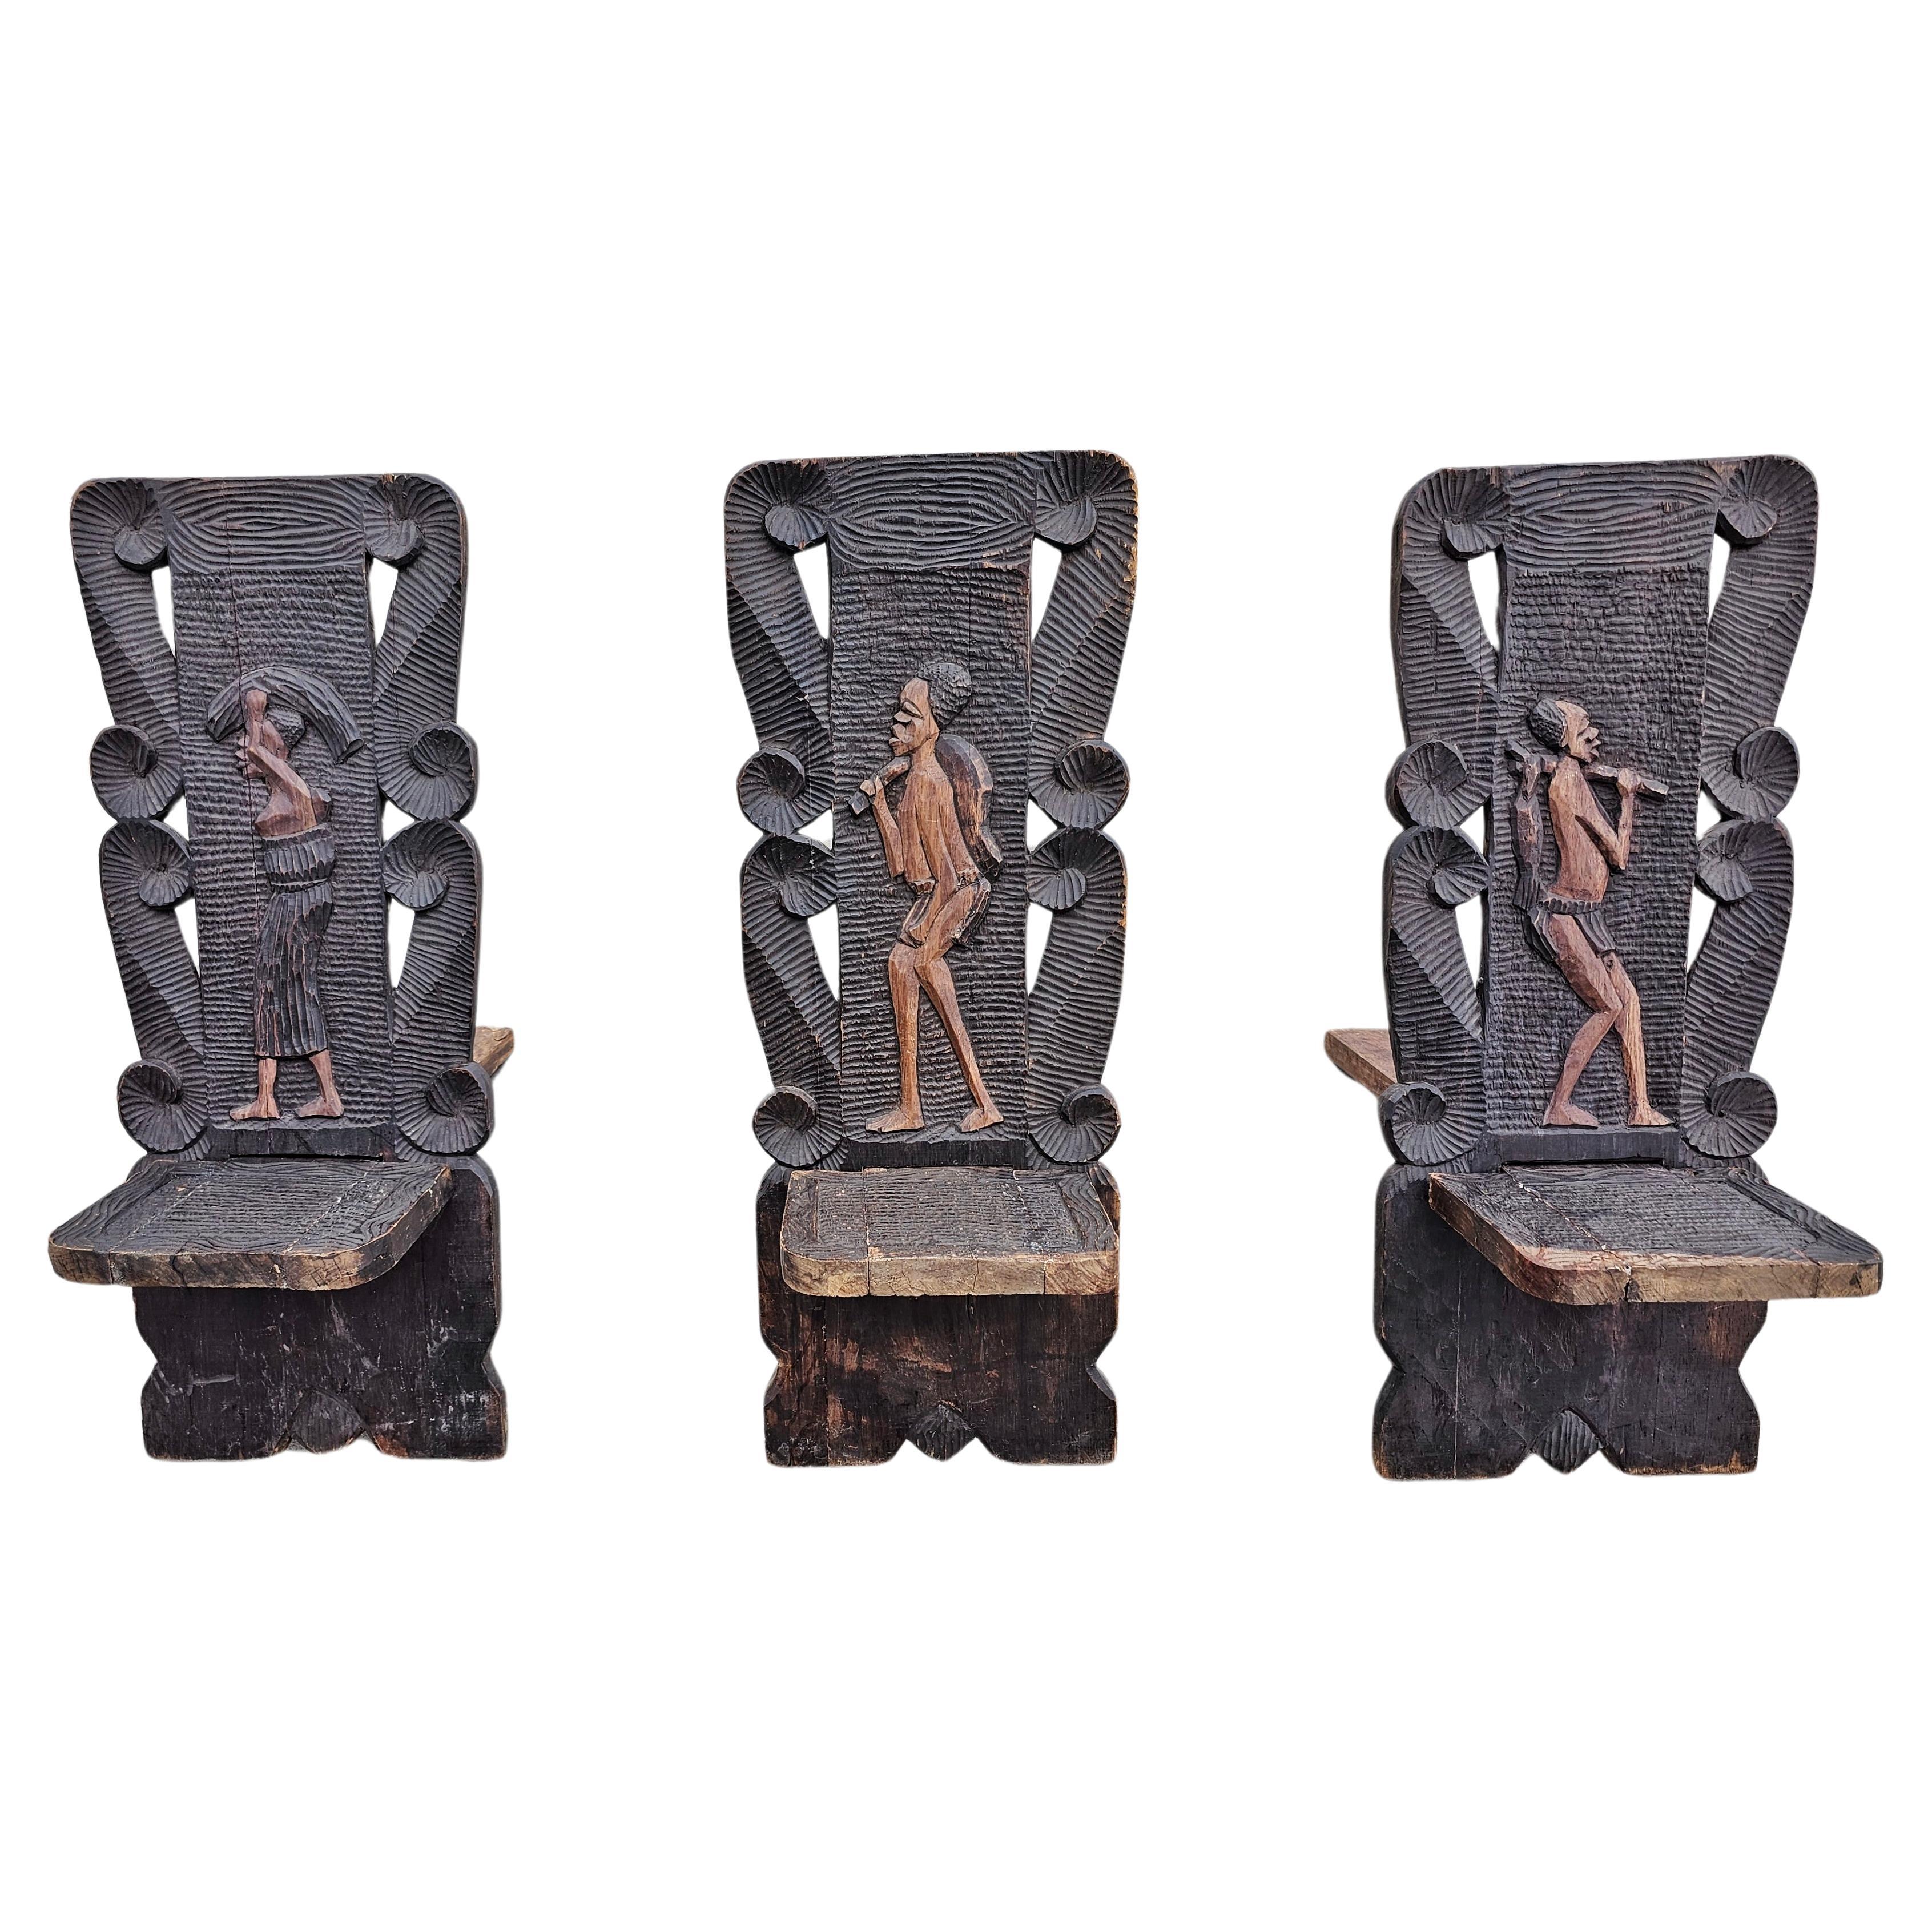 Antique Western African Stargazer Chairs done in hand-carved wood, 1890s